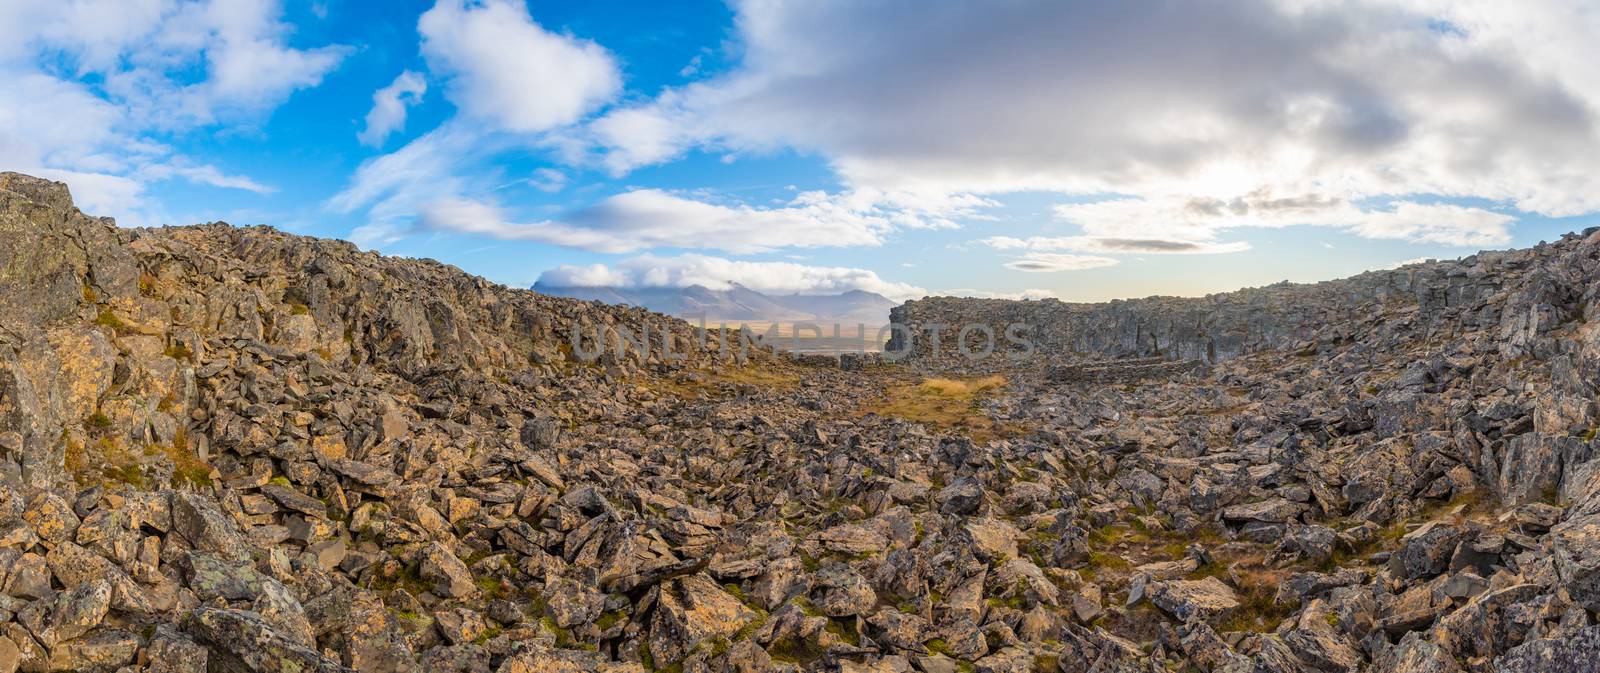 Borgarvirki castle in Iceland view over ancient remains during beautiful sunny day